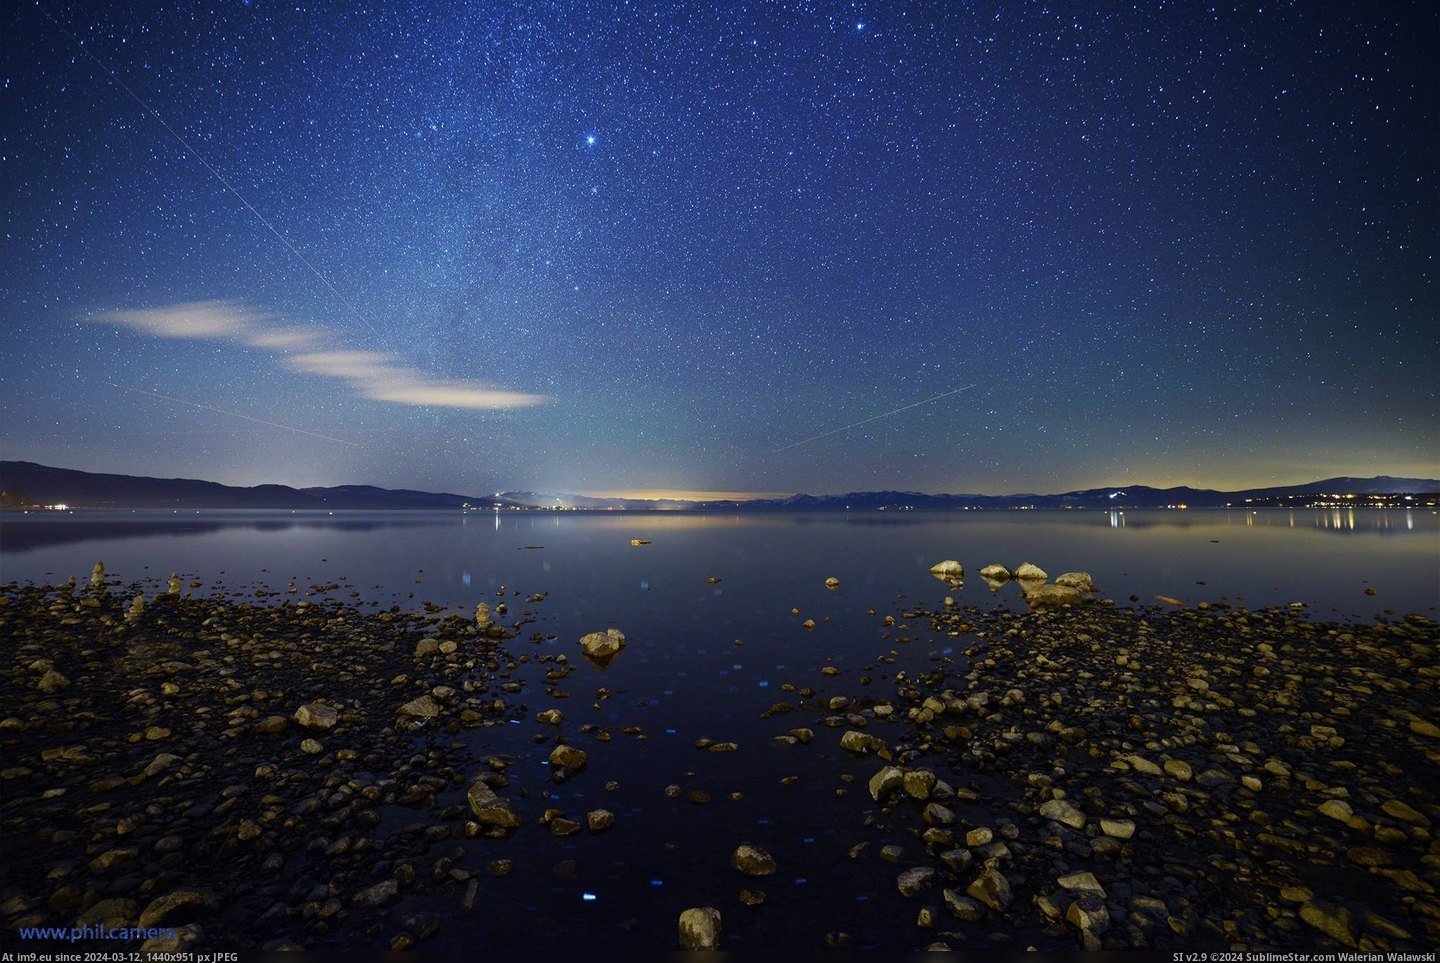 #Night #Lake #North #Interesting #Shore #Waters #Breath #Perfectly #Rocks #Stars #Tahoe [Earthporn] Breath-taking stars, perfectly still waters, and interesting rocks on the North Shore of Lake Tahoe last night [oc b Pic. (Image of album My r/EARTHPORN favs))